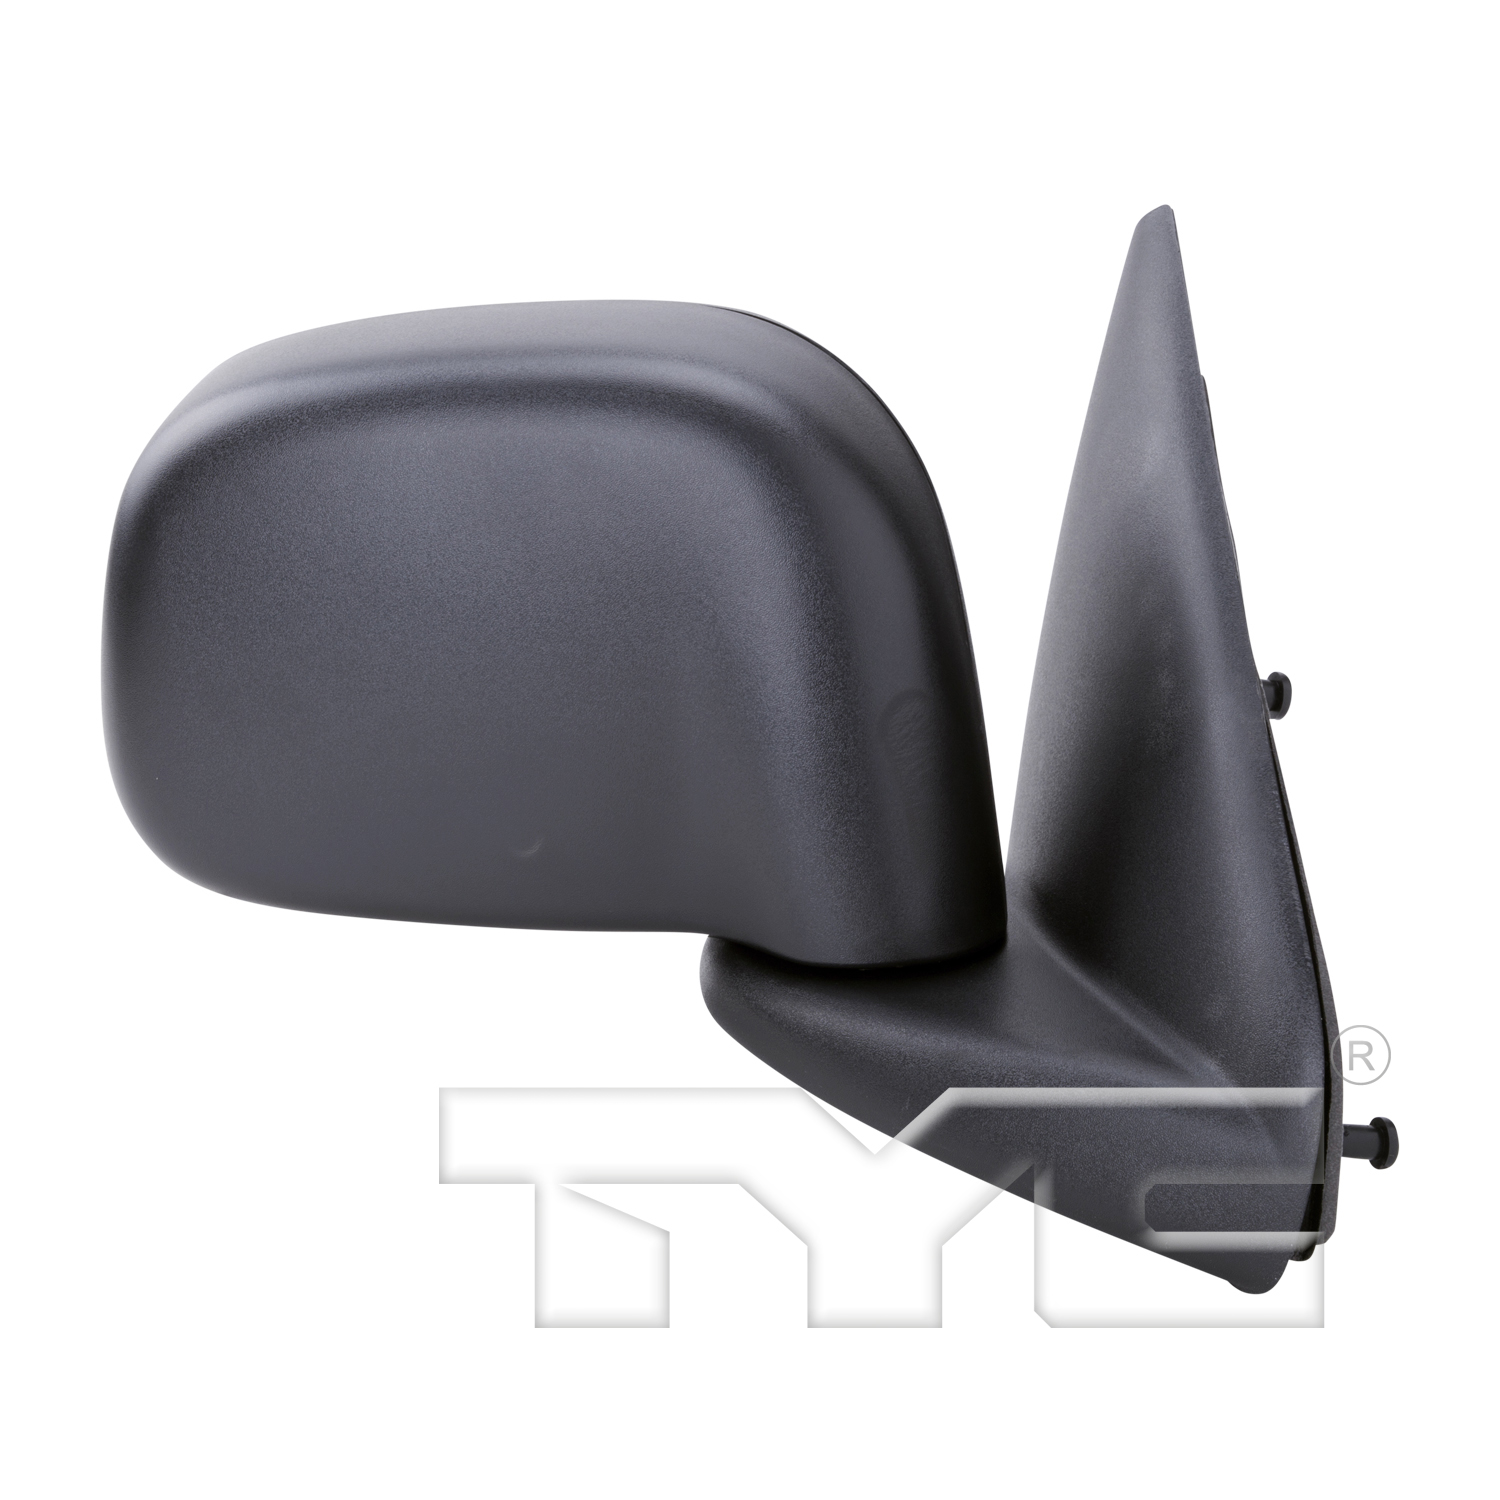 Aftermarket MIRRORS for DODGE - RAM 1500, RAM 1500,02-08,RT Mirror outside rear view